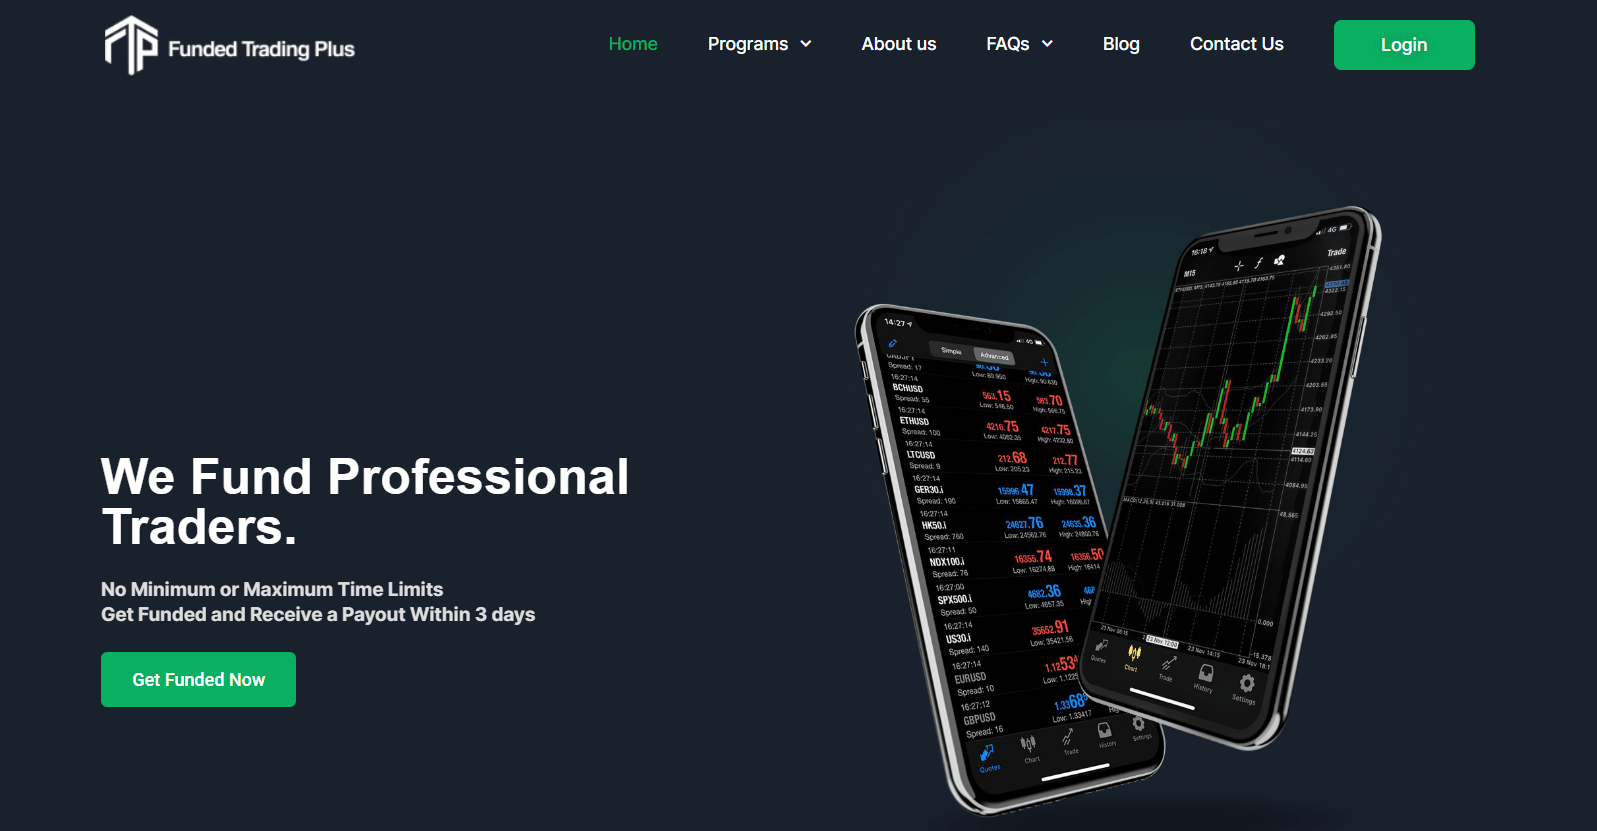 Funded Trading Plus Website